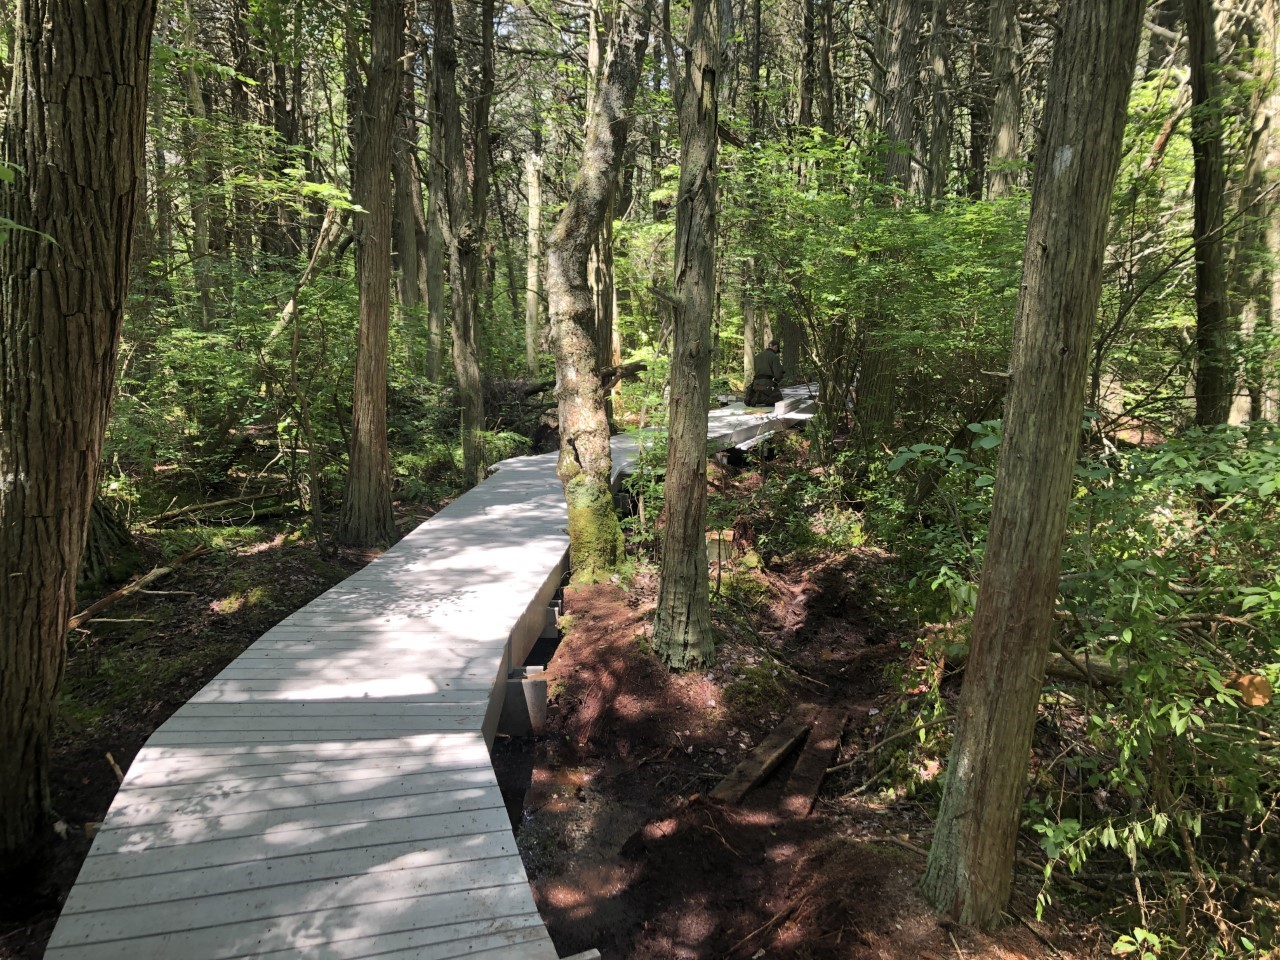 A grey boardwalk meanders through a swamp and forest area with tall trees and lush green vegetation